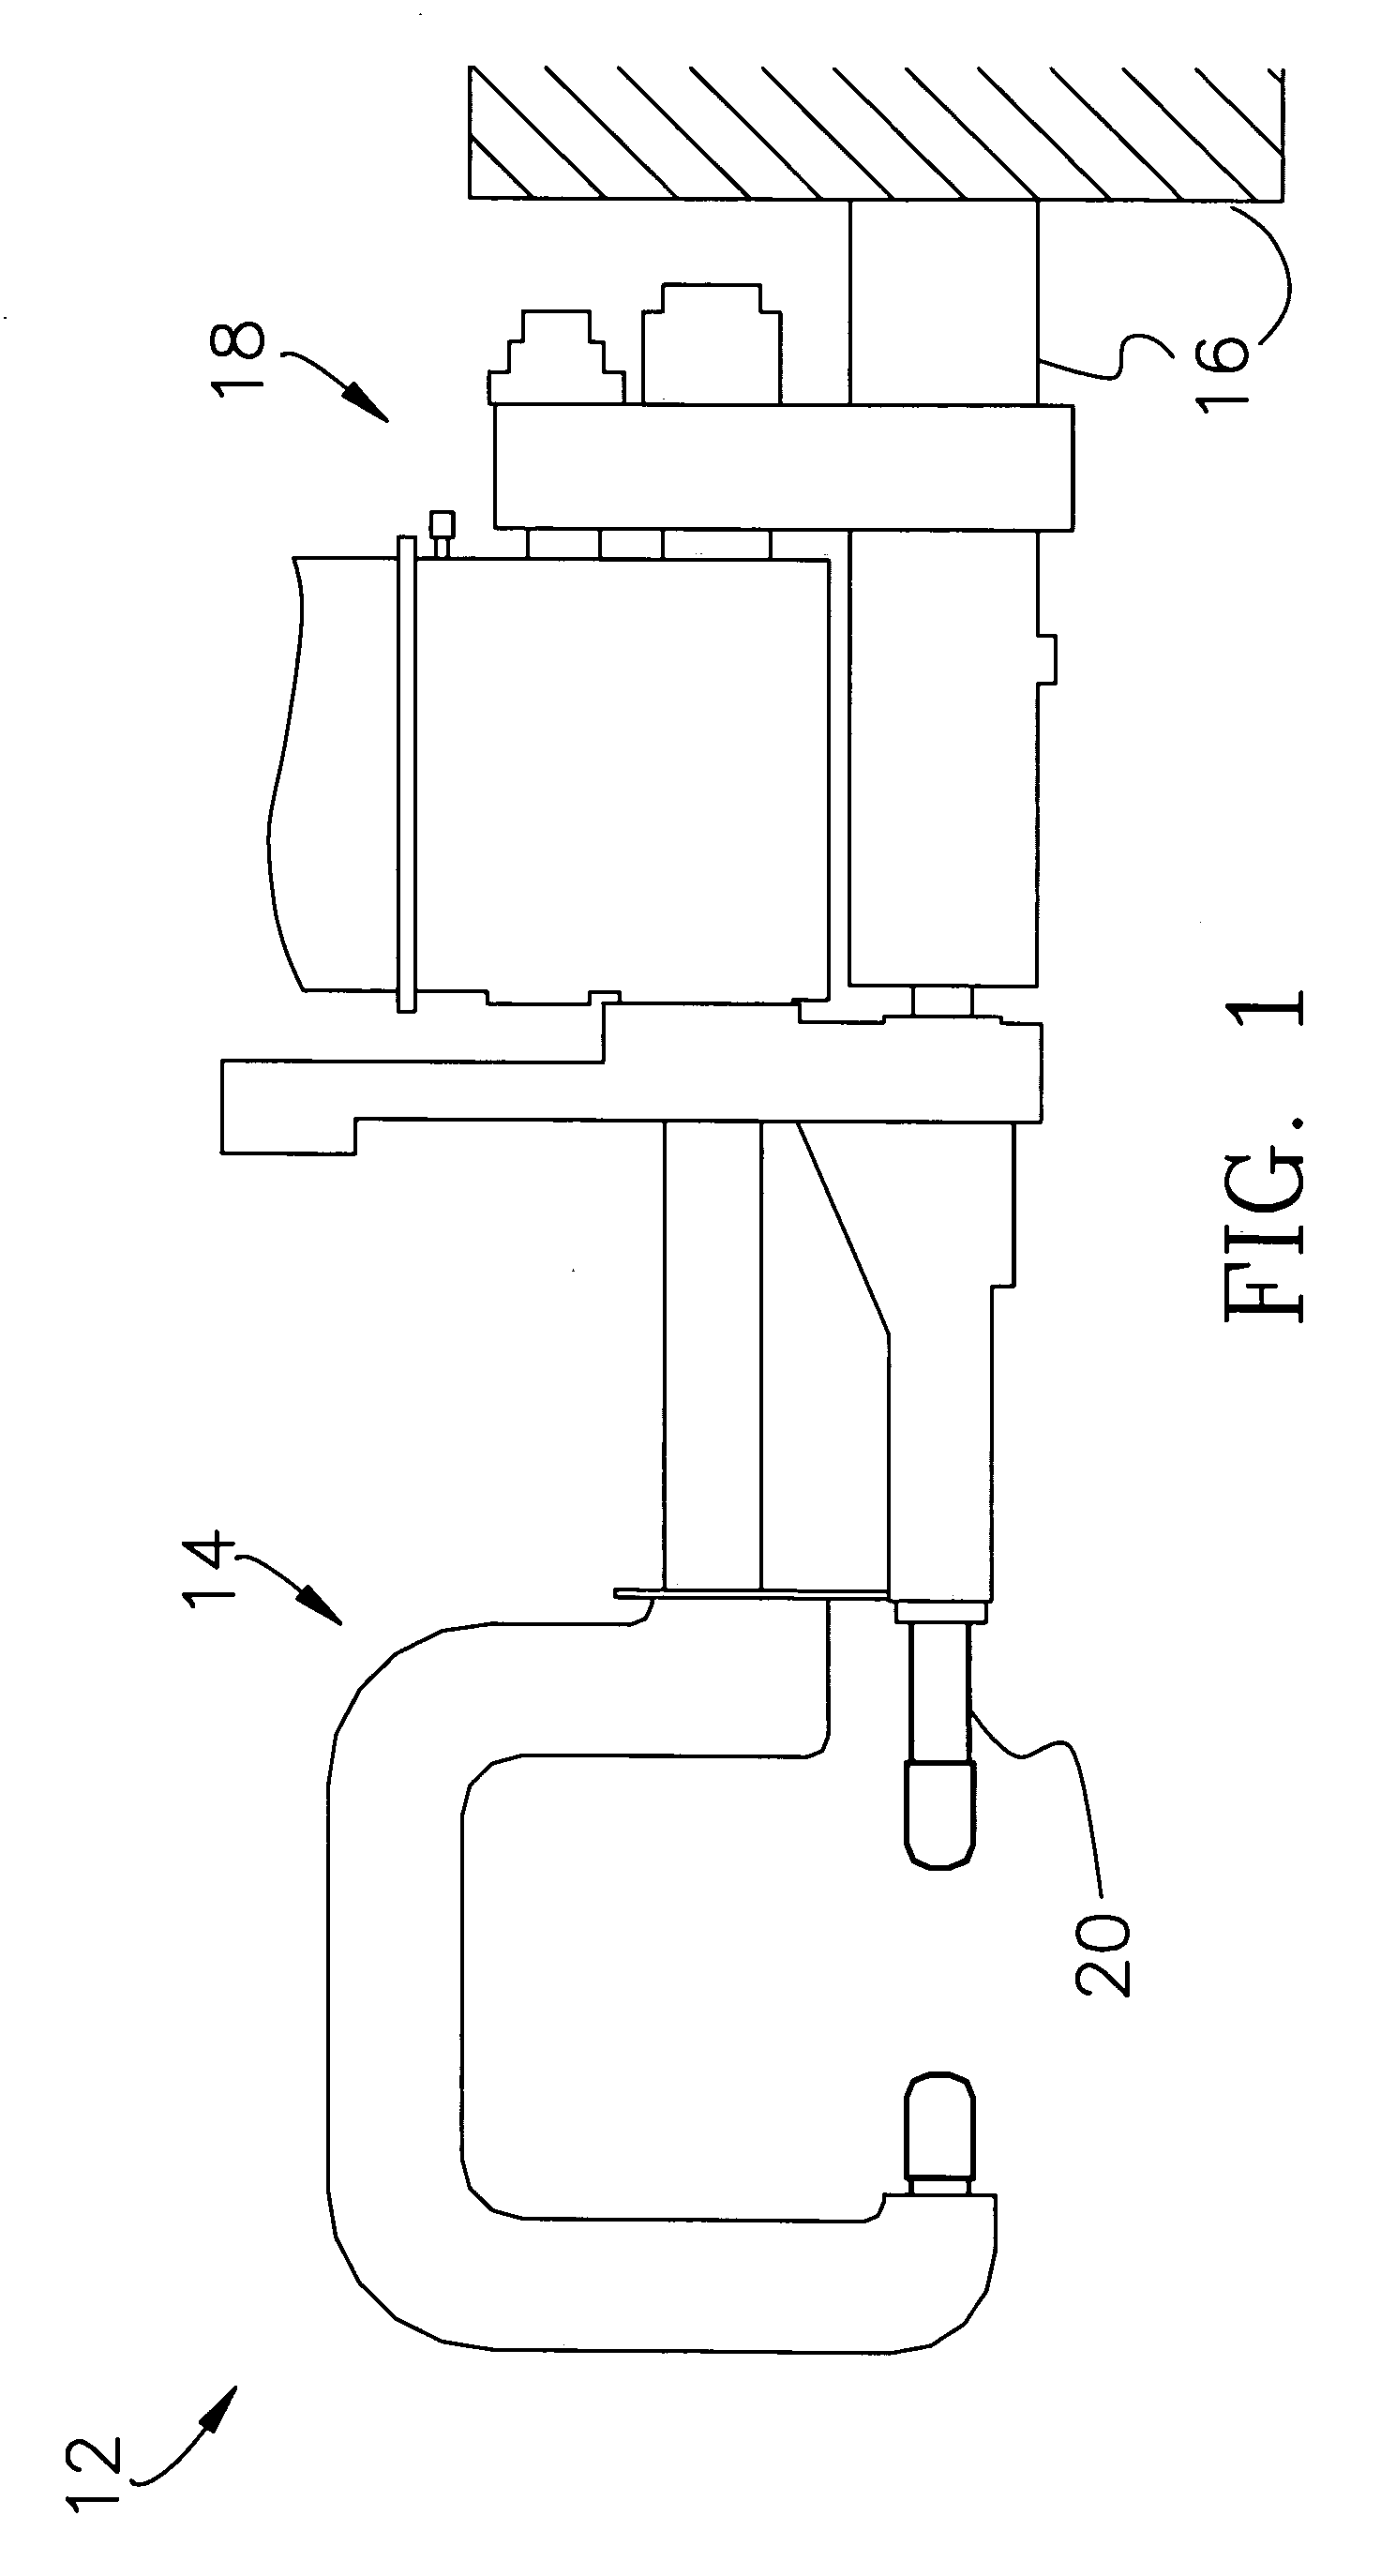 Resistance welding tip with improved cooling system